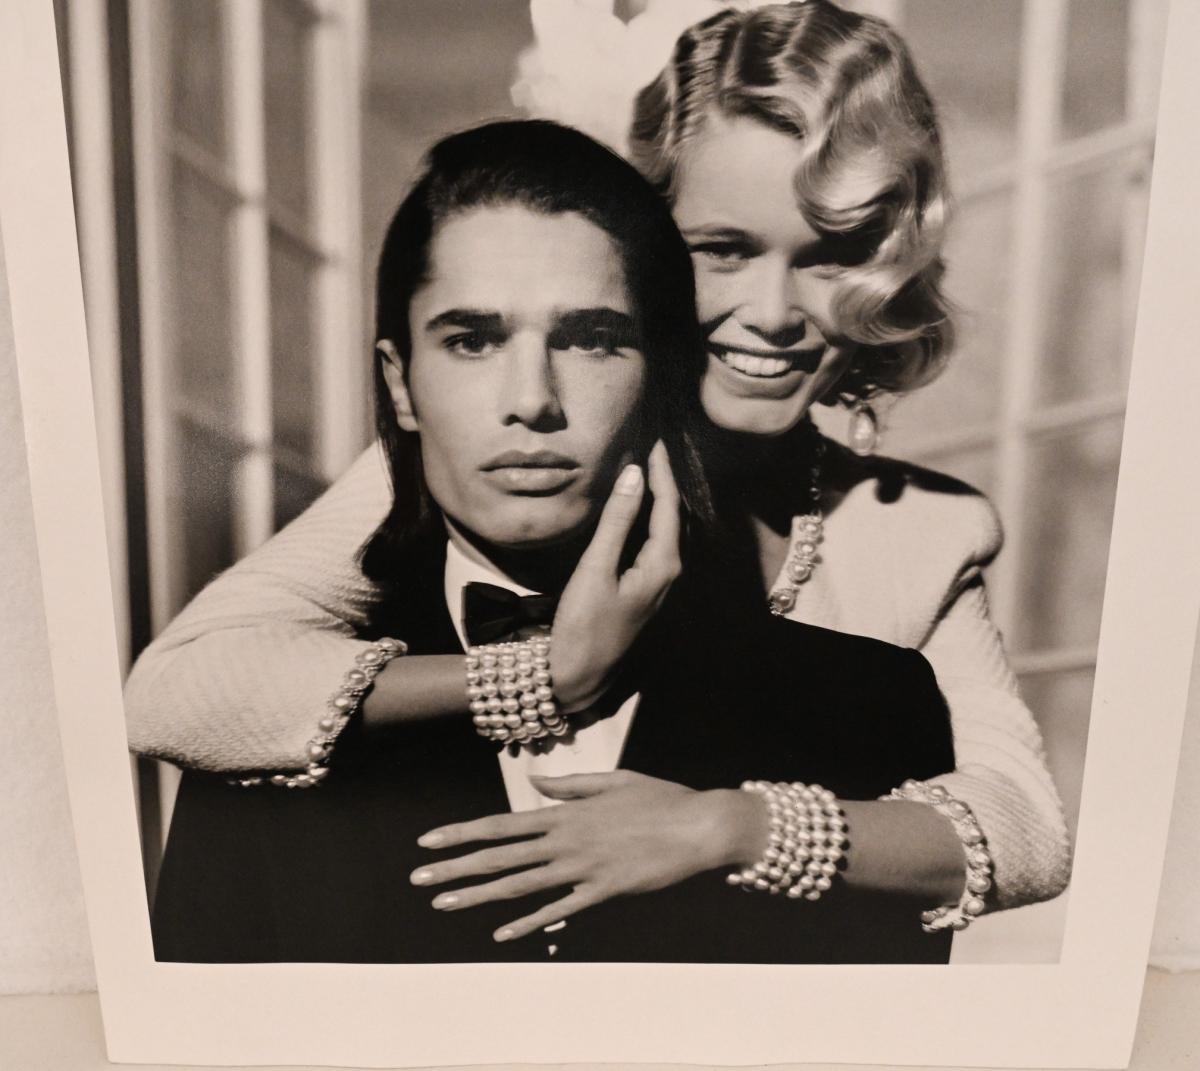 Original photograph of Claudia Schiffer with Cameron Alborzian by Karl Lagerfeld